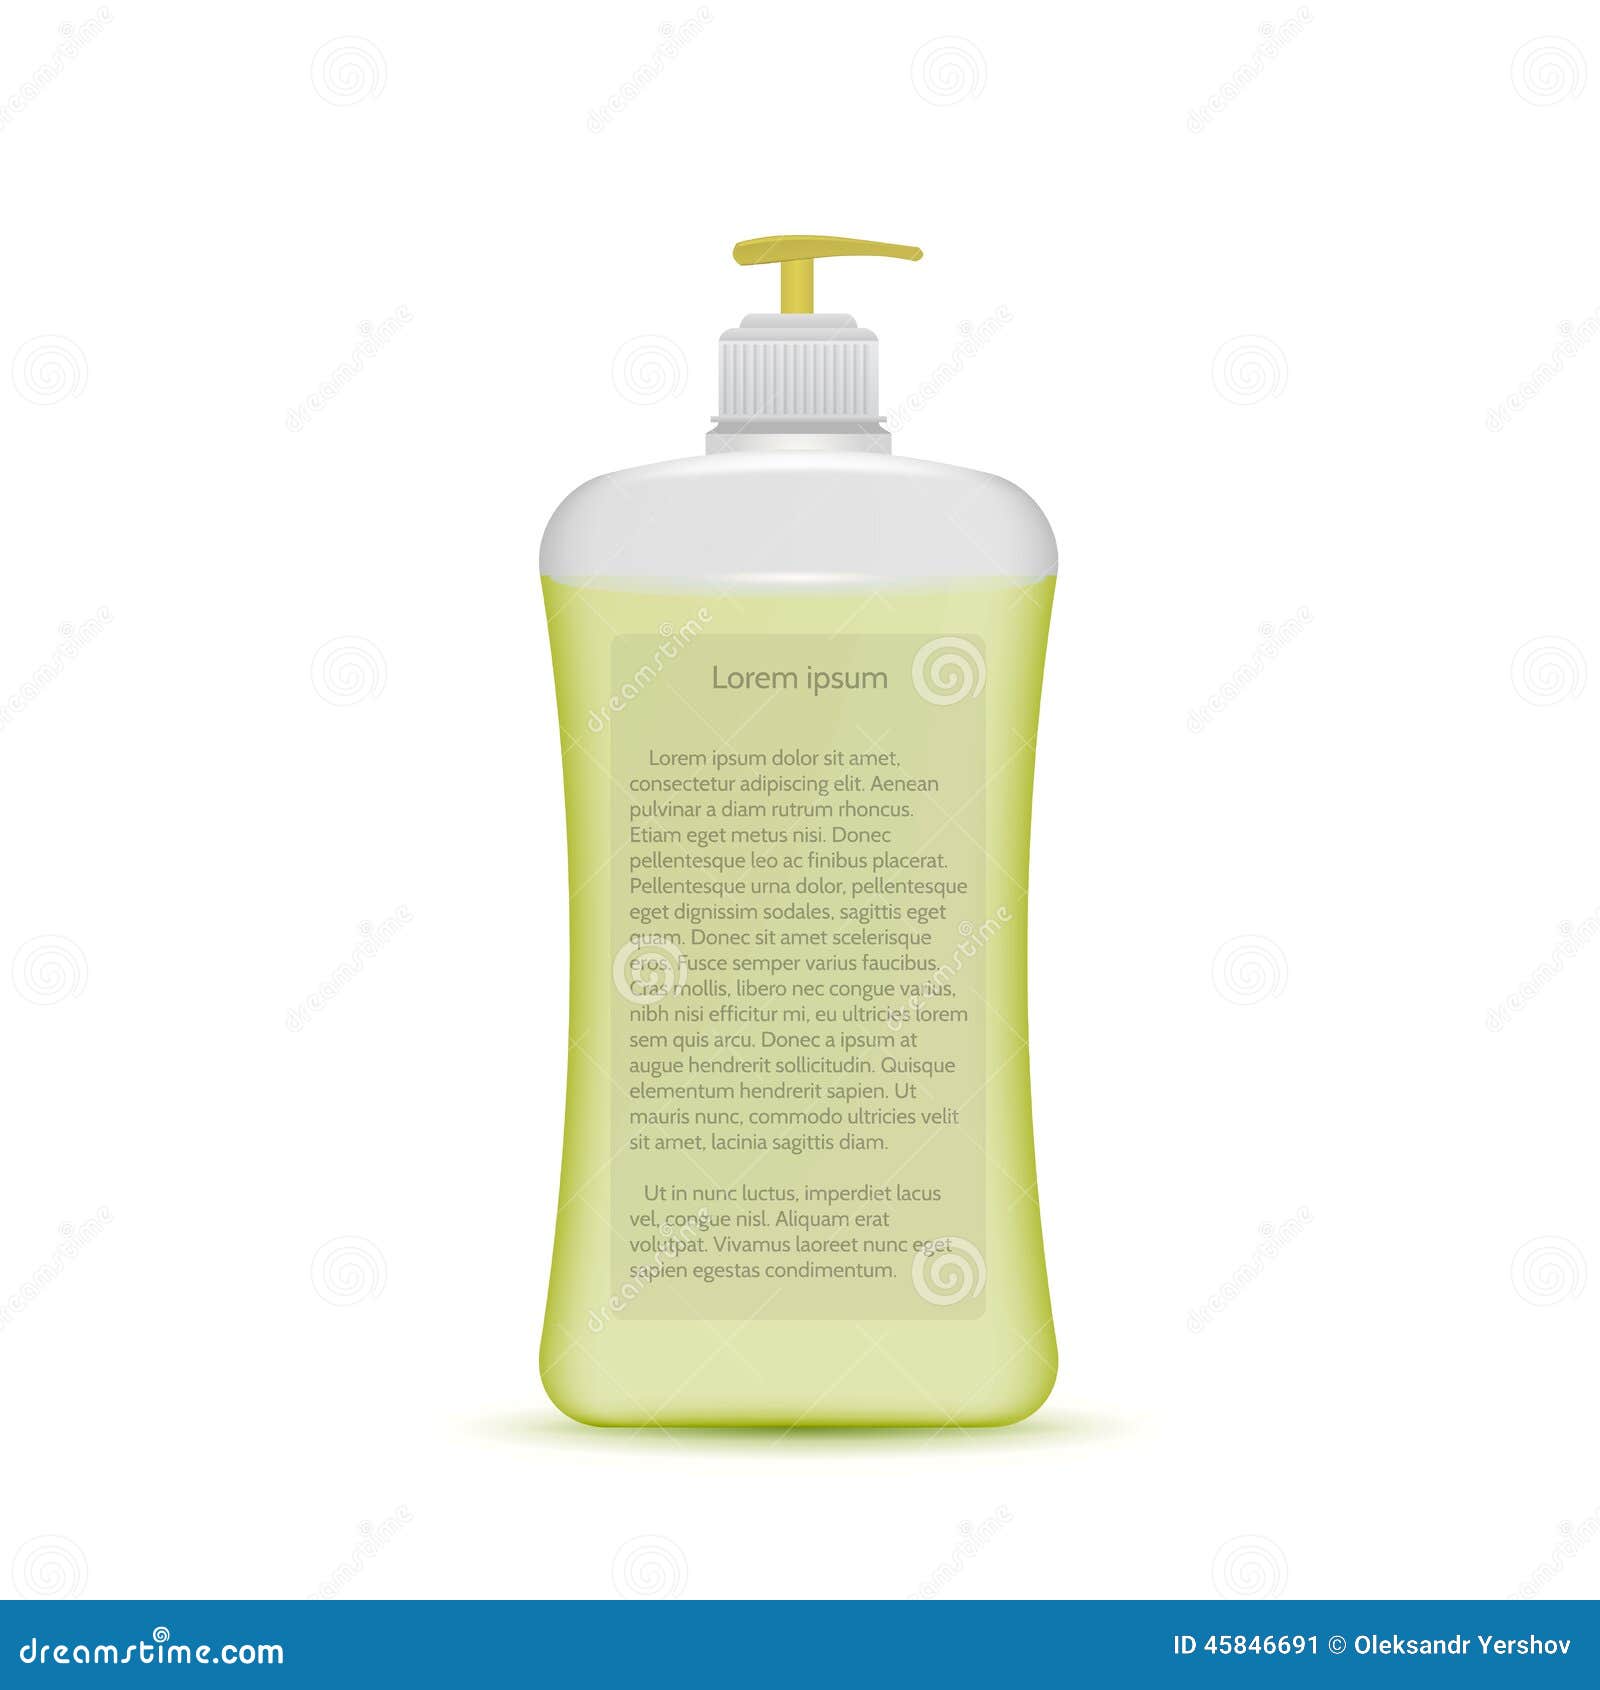 Download Illustration Of Liquid Soap Bottle Stock Vector Illustration Of Cosmetic Health 45846691 Yellowimages Mockups